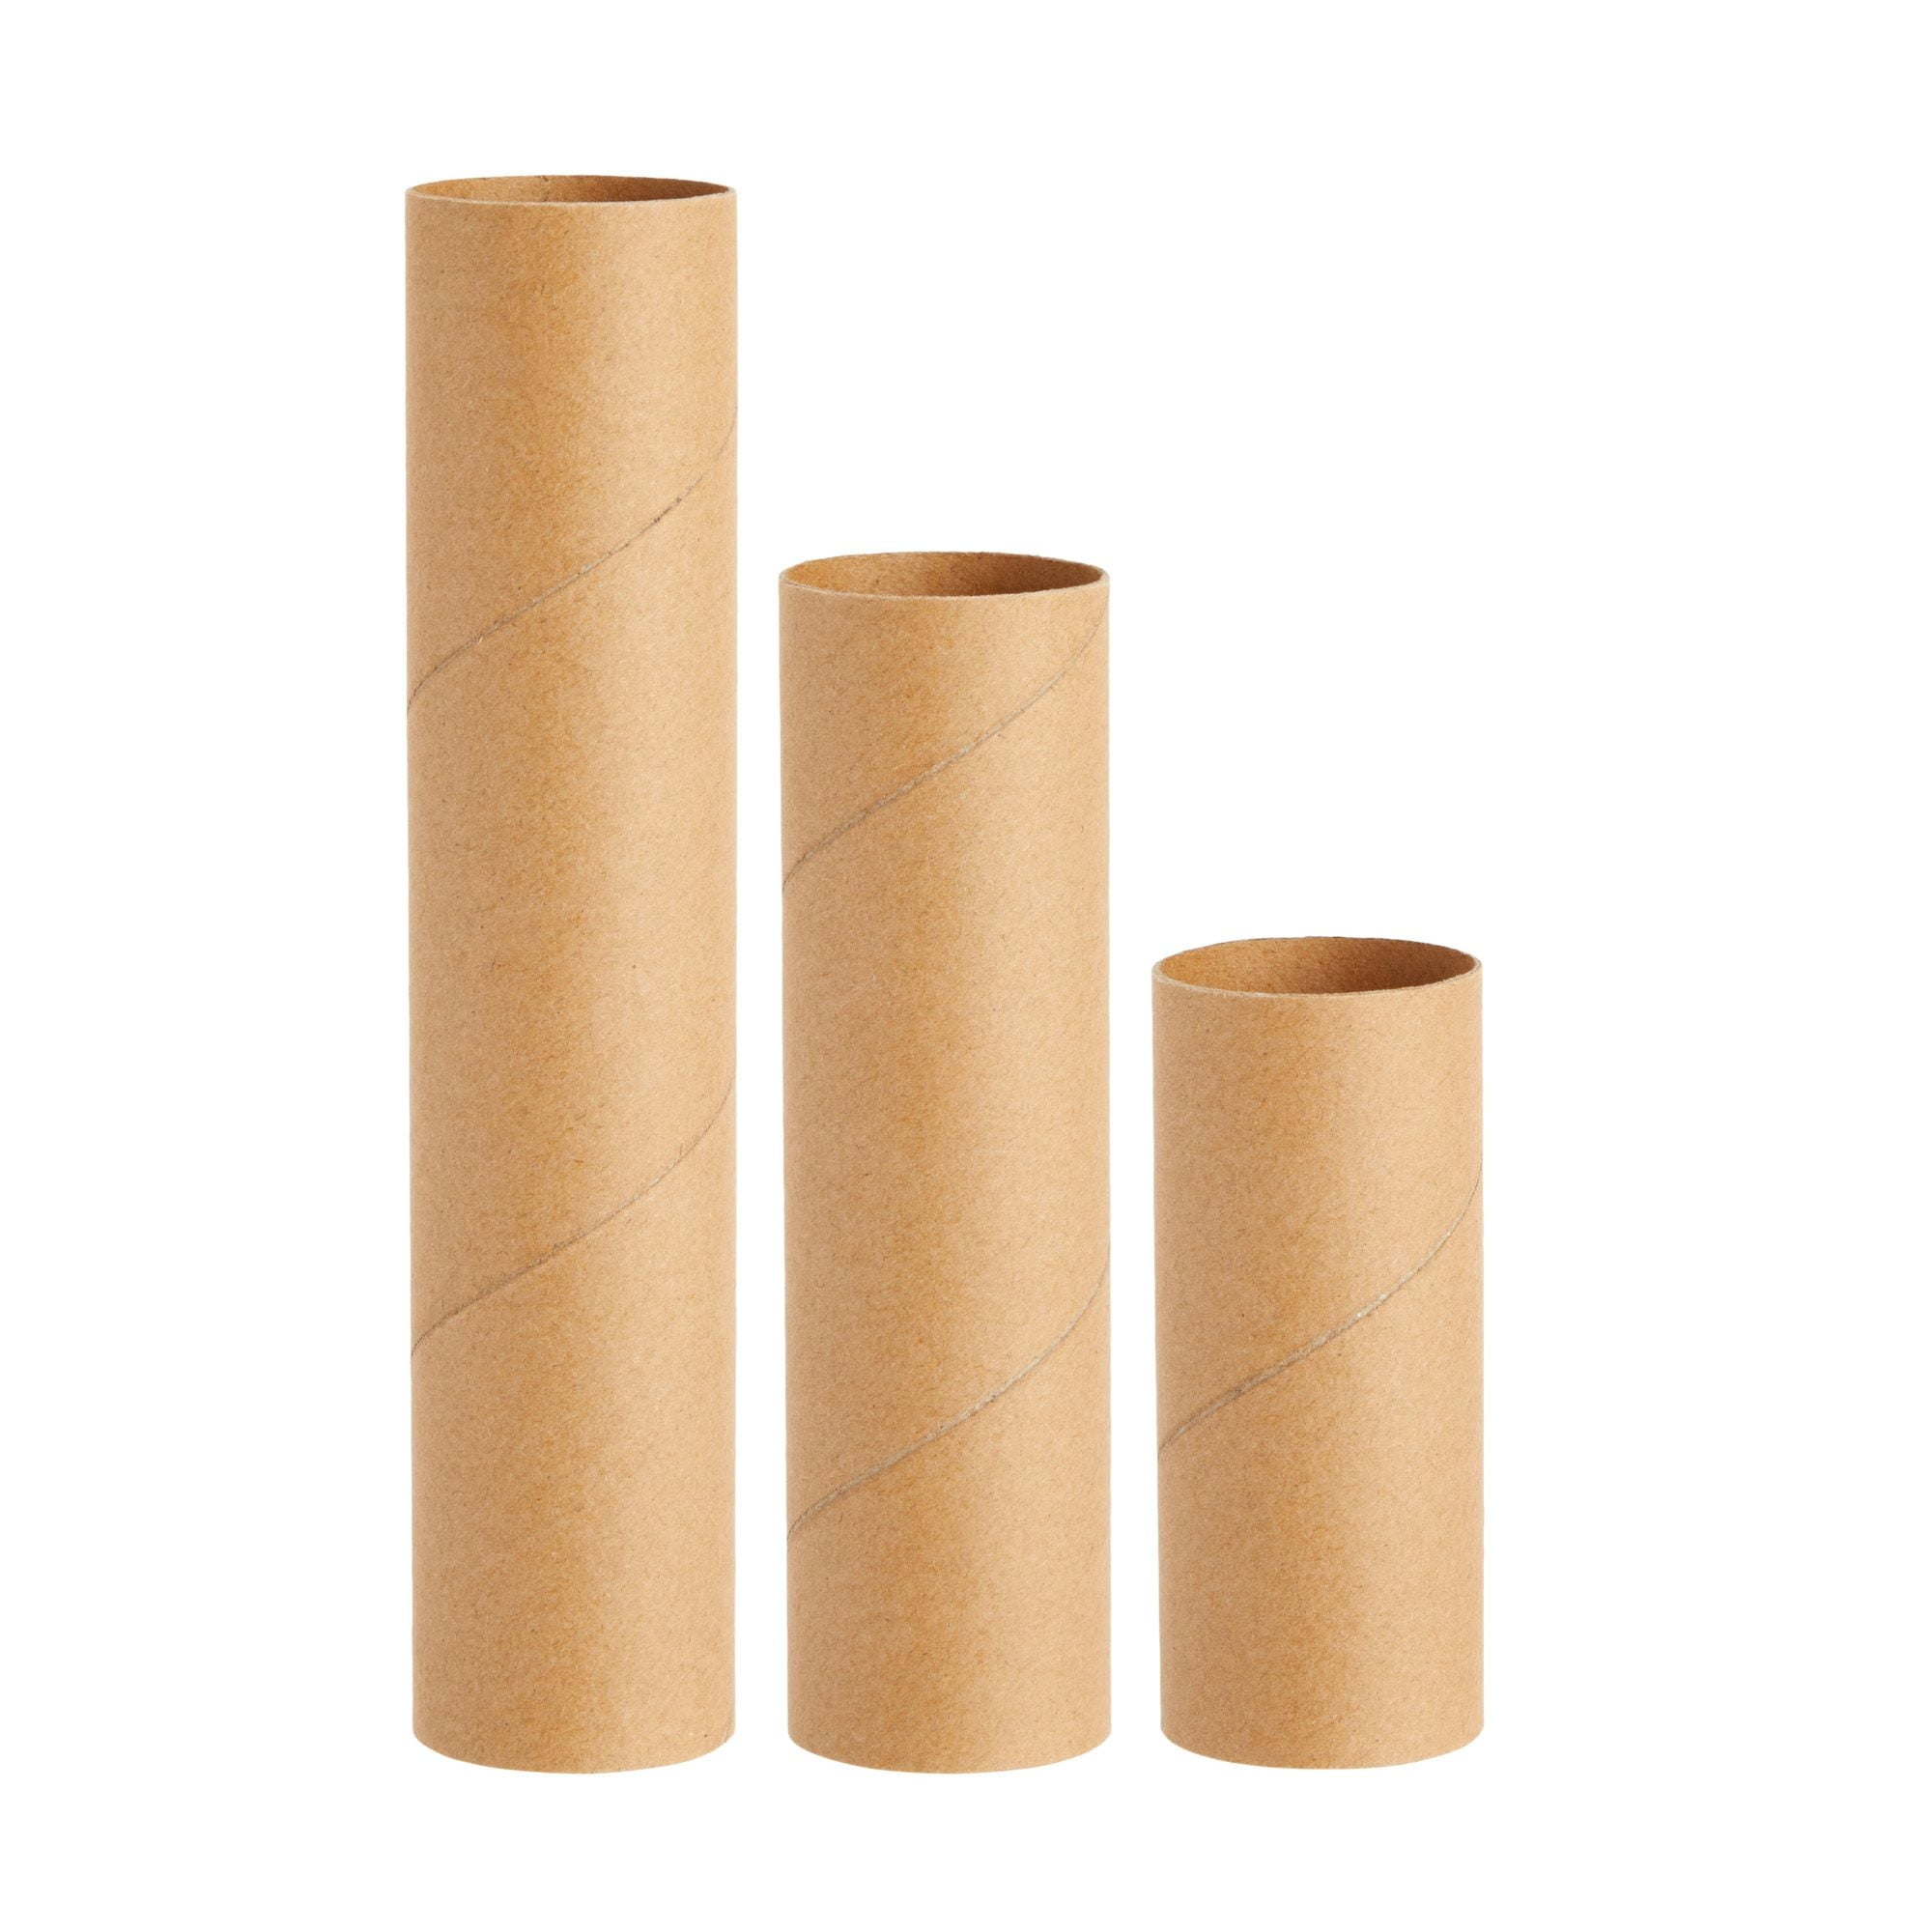 Henoyso 36 Pcs 1.77 x 10 Cardboard Tubes for Crafts Christmas Cardboard  Paper Thick Craft Rolls Tubes Paper Tubes Empty Toilet Paper Roll for Craft